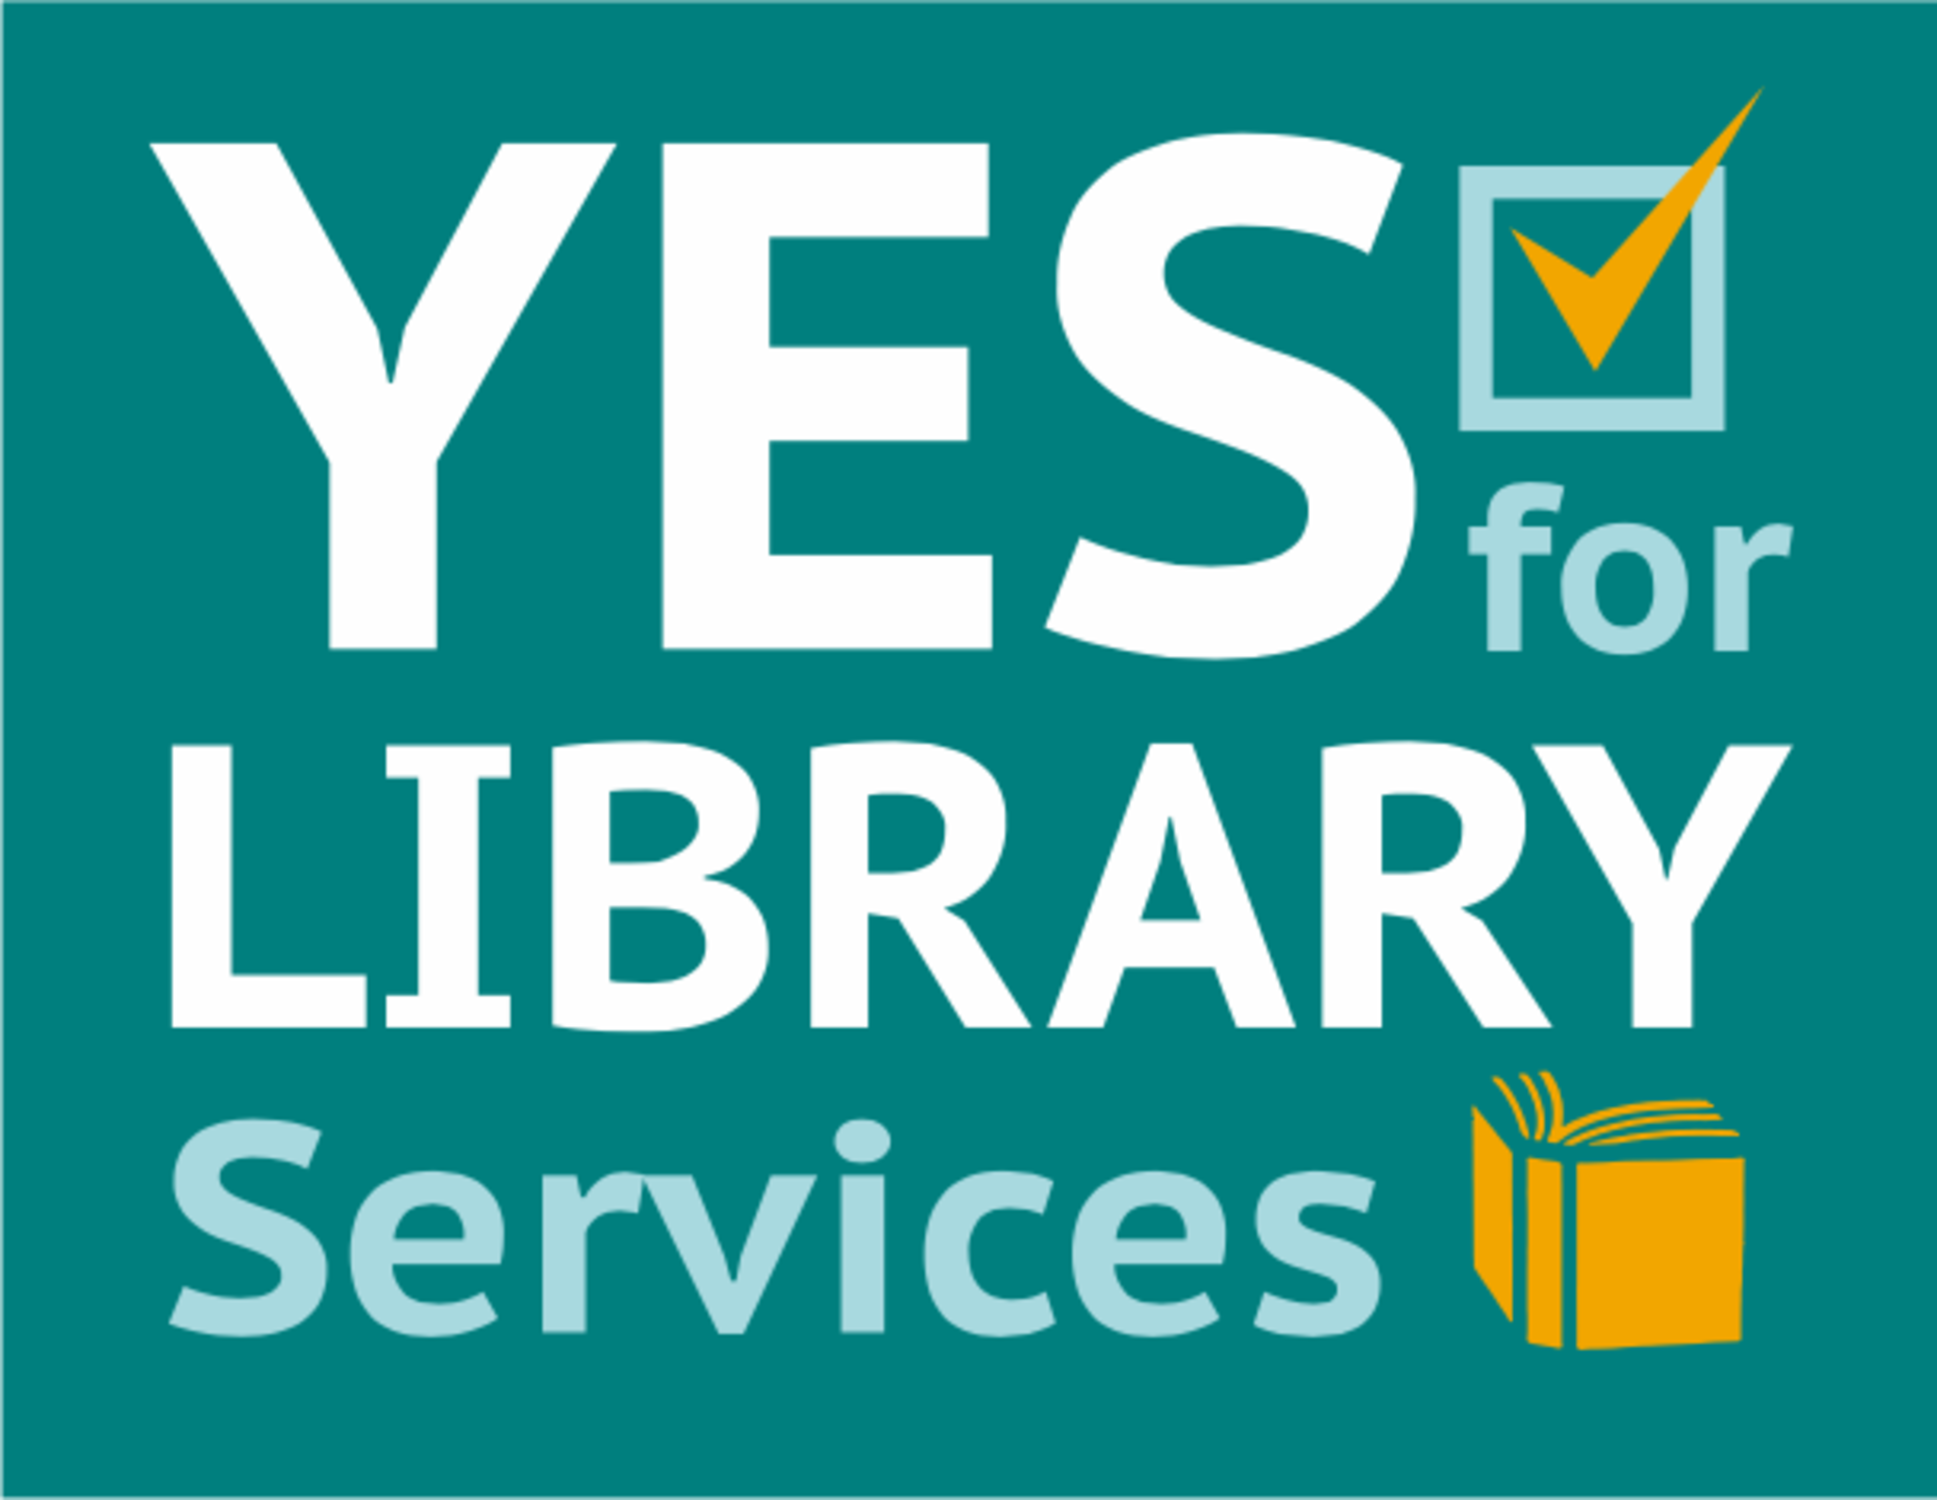 Vote YES for Library Services